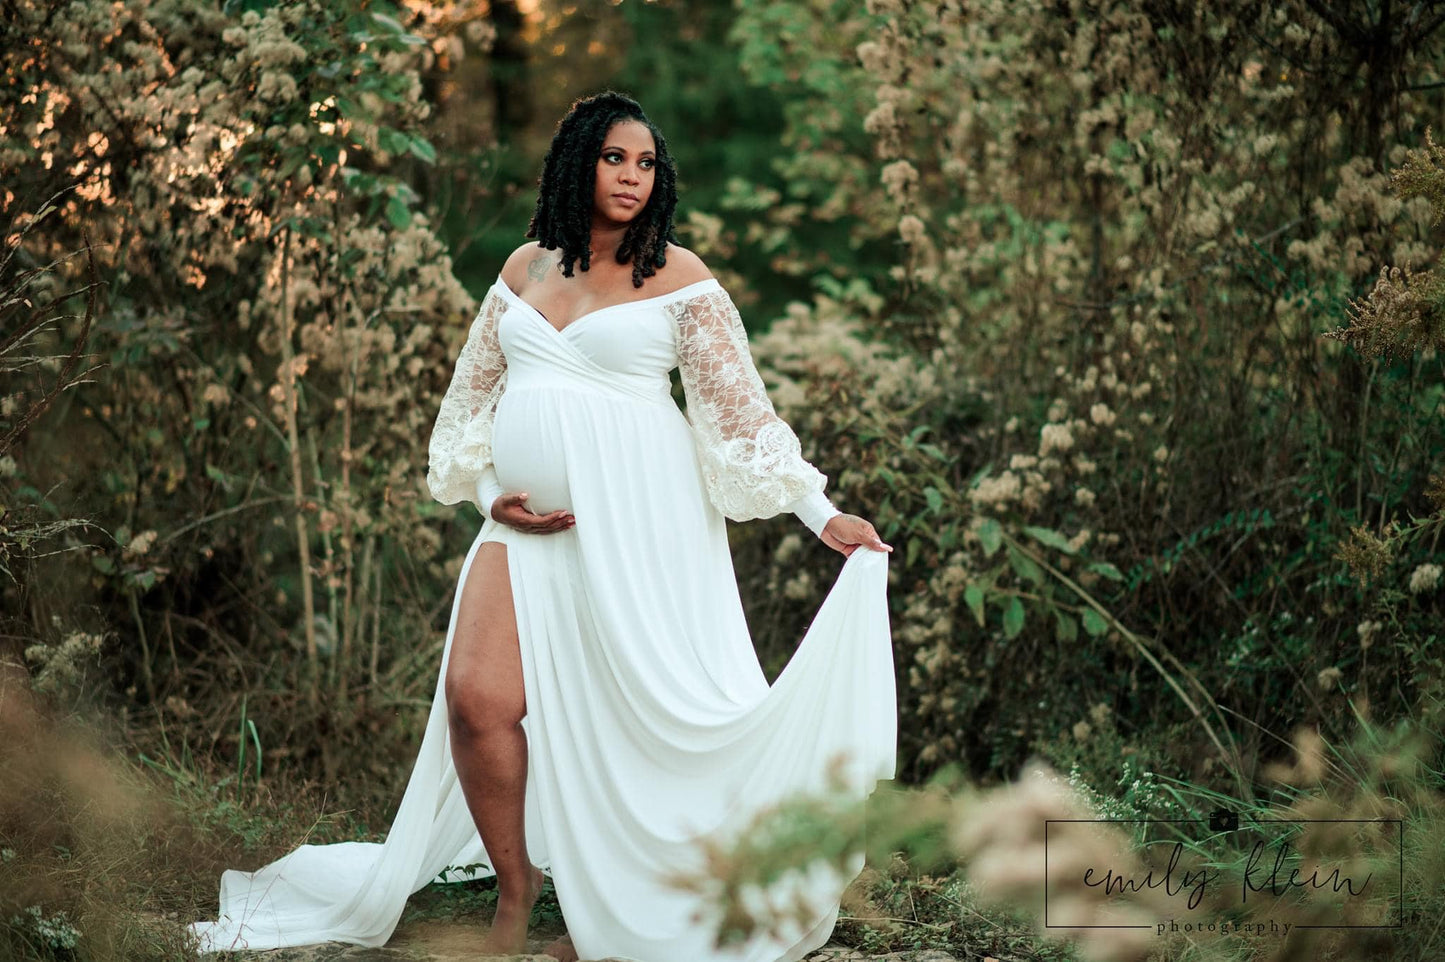 Ivory Clara Gown - lace sleeves - maternity photoshoot dress